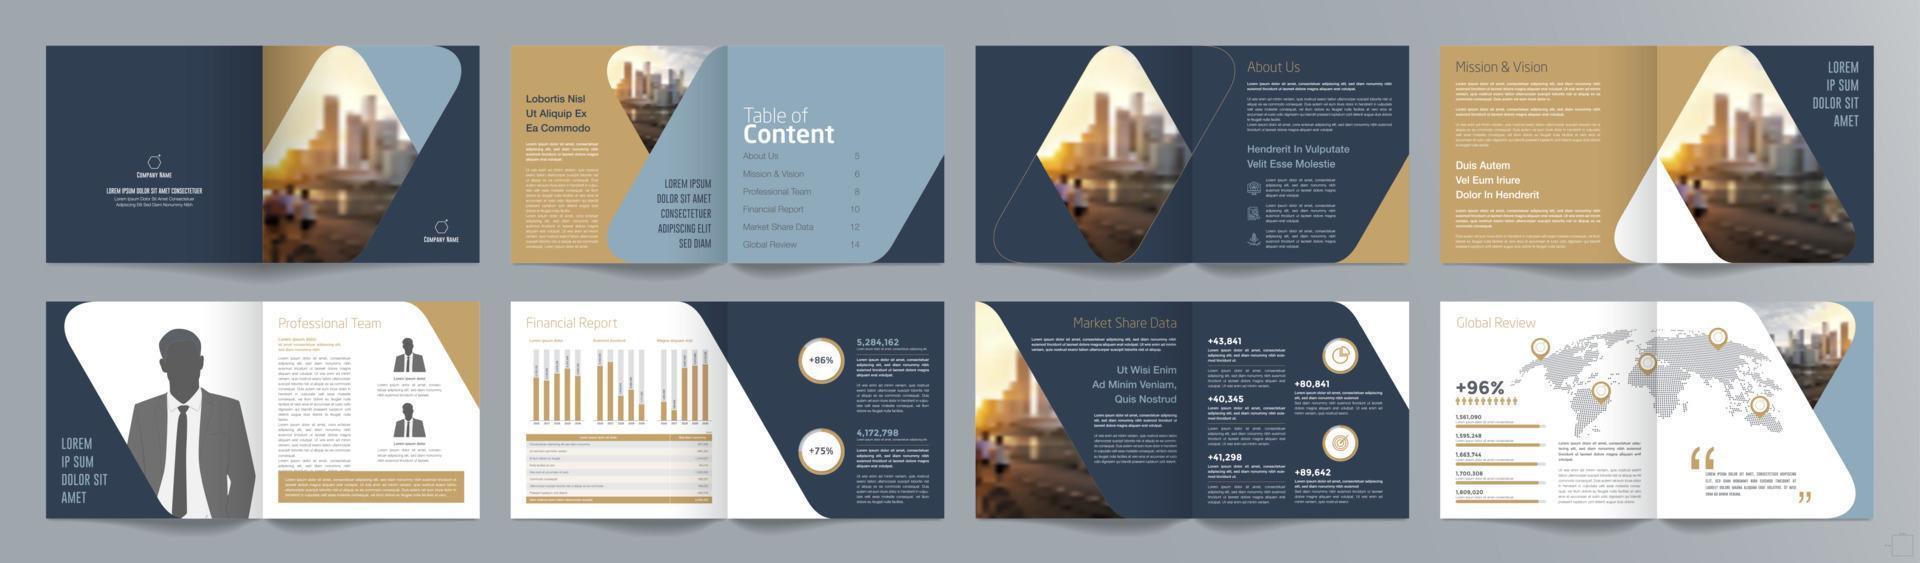 Corporate business presentation guide brochure template, Annual report, 16 page minimalist flat geometric business brochure design template, square size. vector